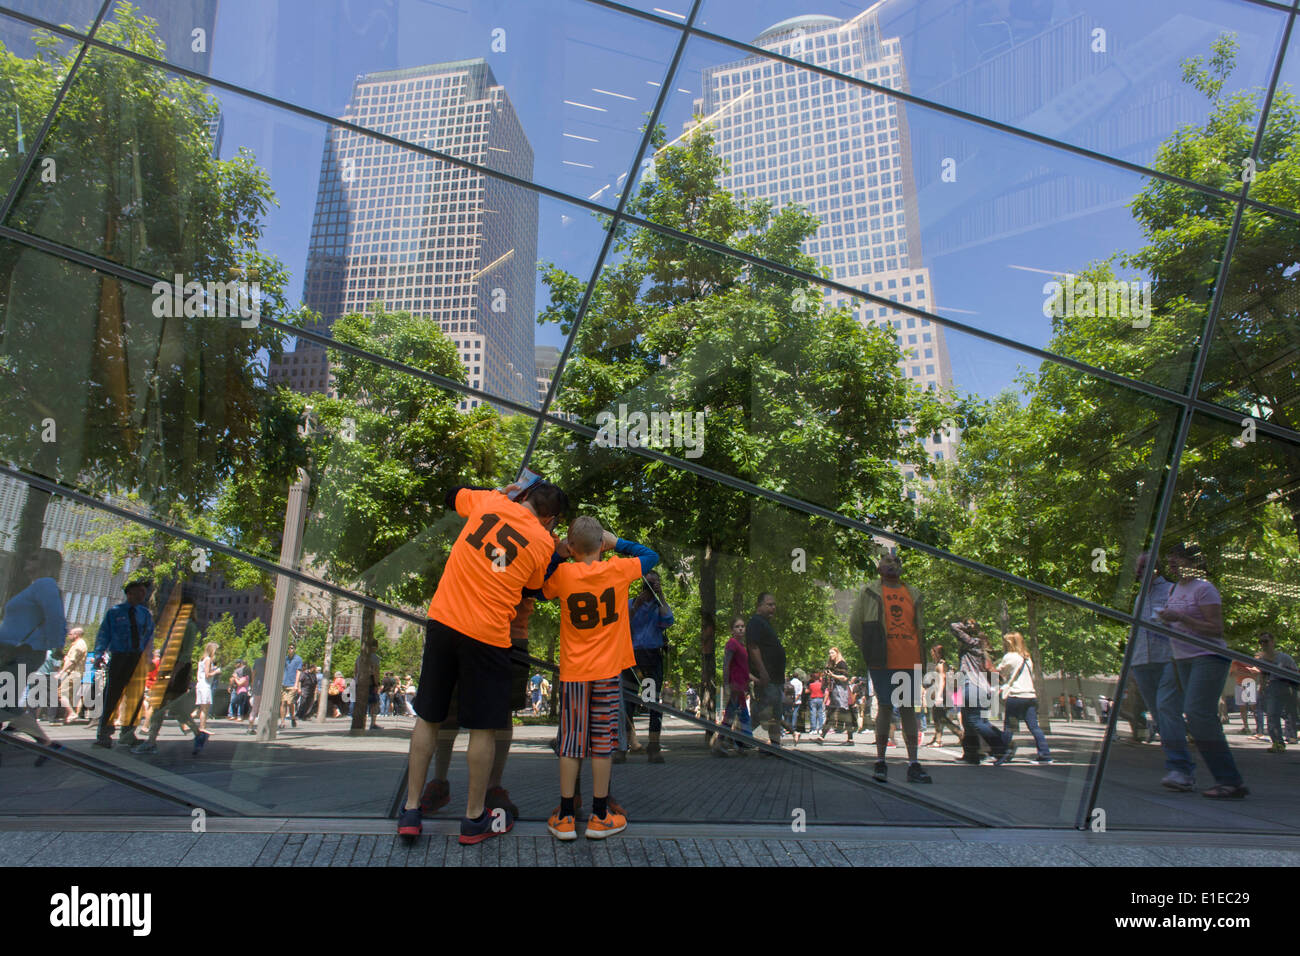 Visitors wearing identical shirts peer into plate glass window at the 9/11 Memorial in New York, killed at the locations of terrorist attacks on September 11th 2001. The National September 11 Memorial is a tribute of remembrance and honor to the nearly 3,000 people killed in the terror attacks of September 11, 2001 at the World Trade Center site, near Shanksville, Pa., and at the Pentagon, as well as the six people killed in the World Trade Center bombing in February 1993. Stock Photo